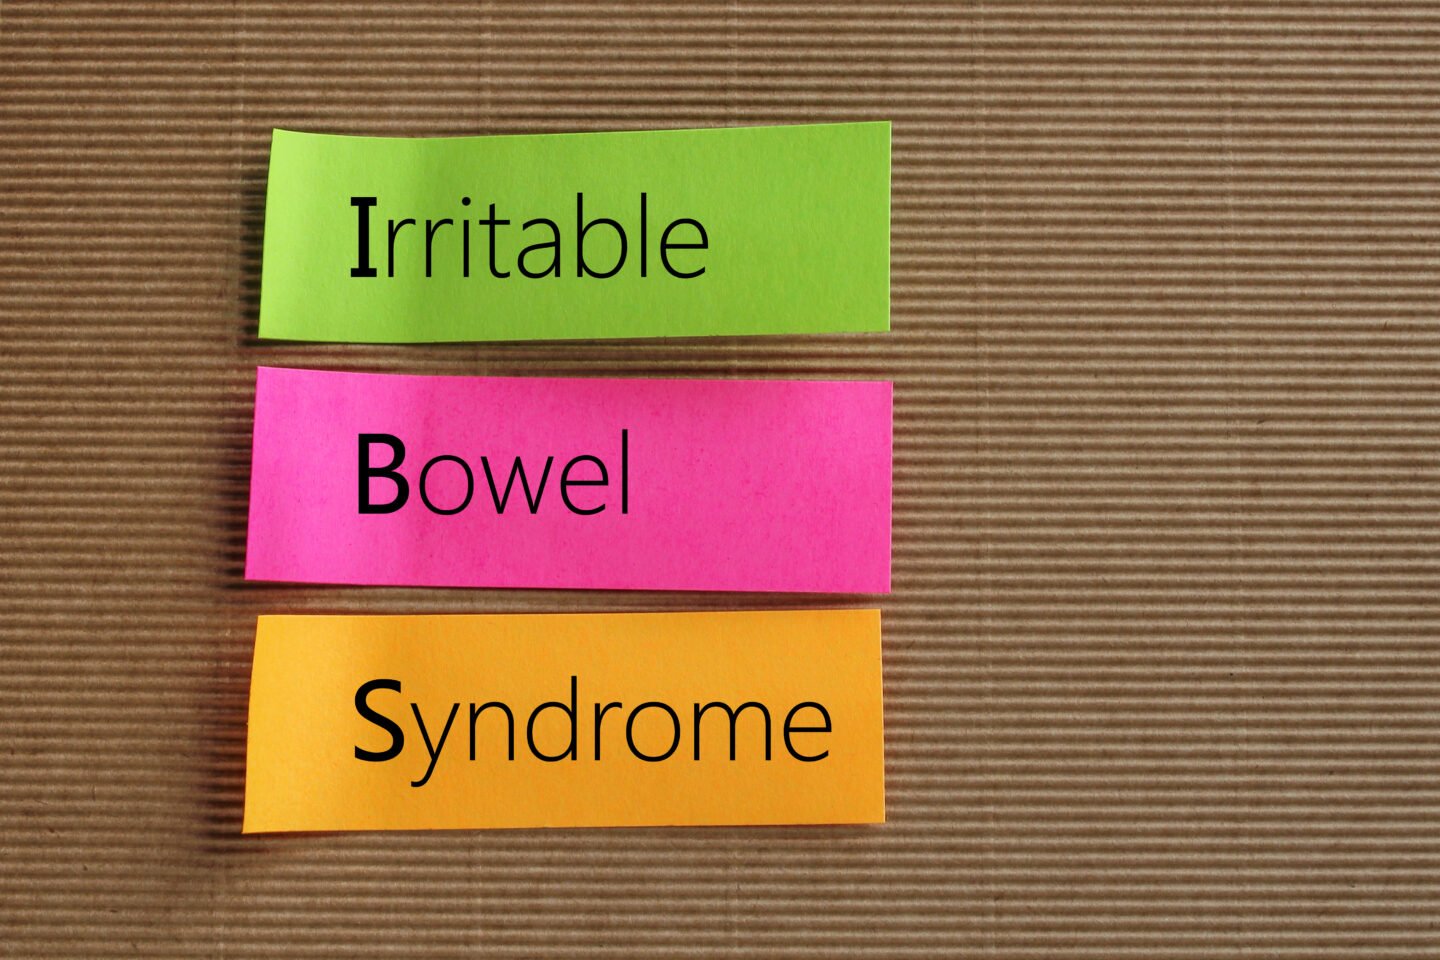 Irritable,Bowel,Syndrome,Text,On,Colorful,Sticky,Notes